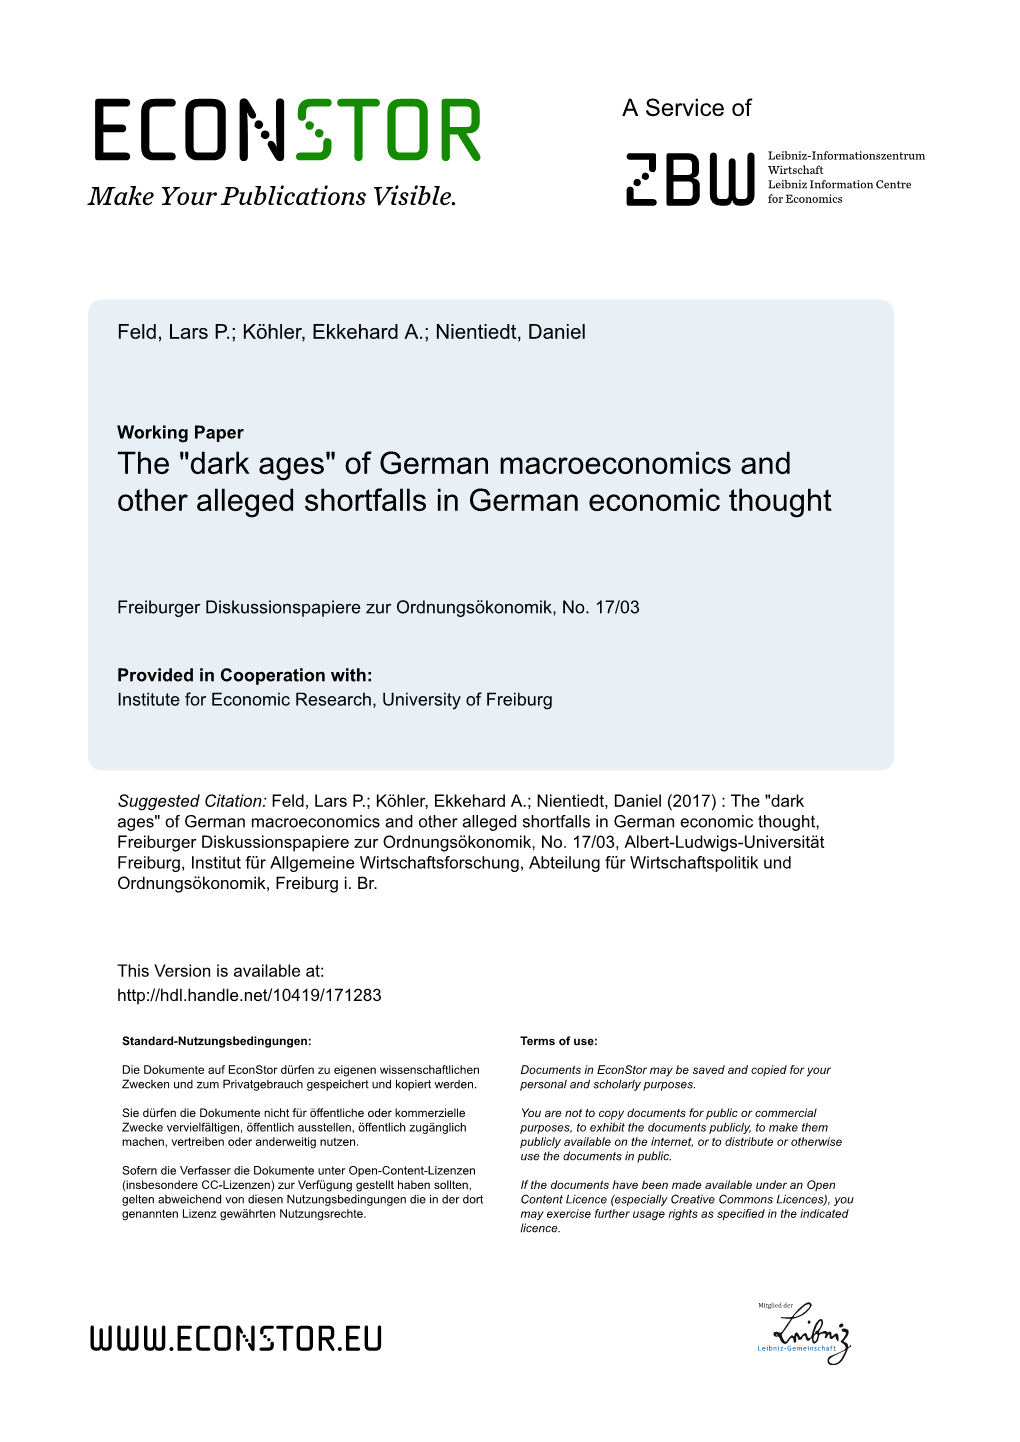 Of German Macroeconomics and Other Alleged Shortfalls in German Economic Thought